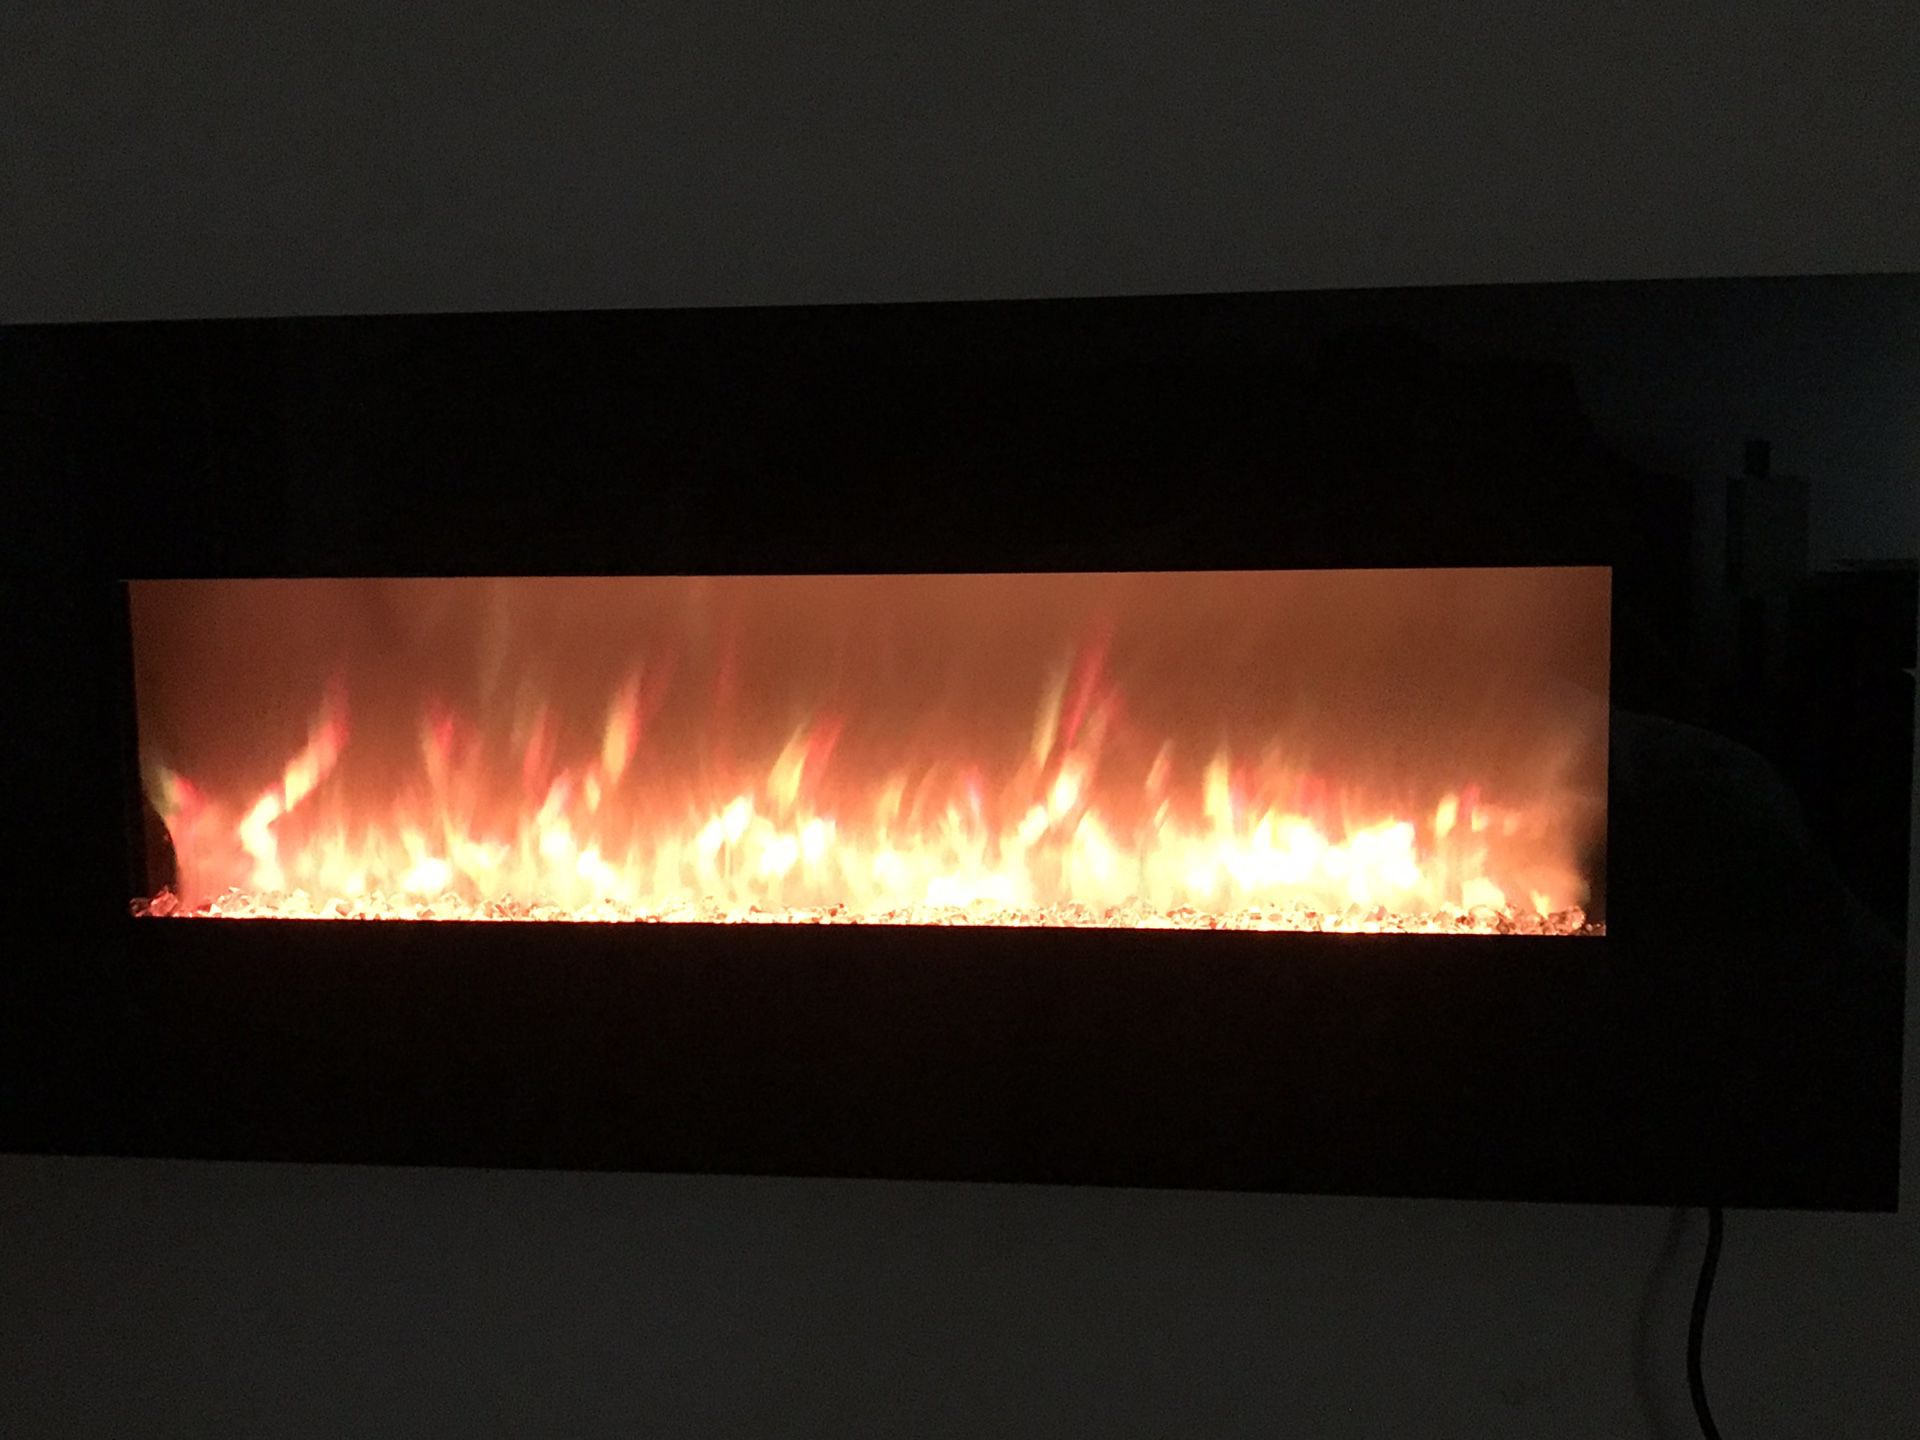 Northwest 50” Electric Fireplace with heater (like new)